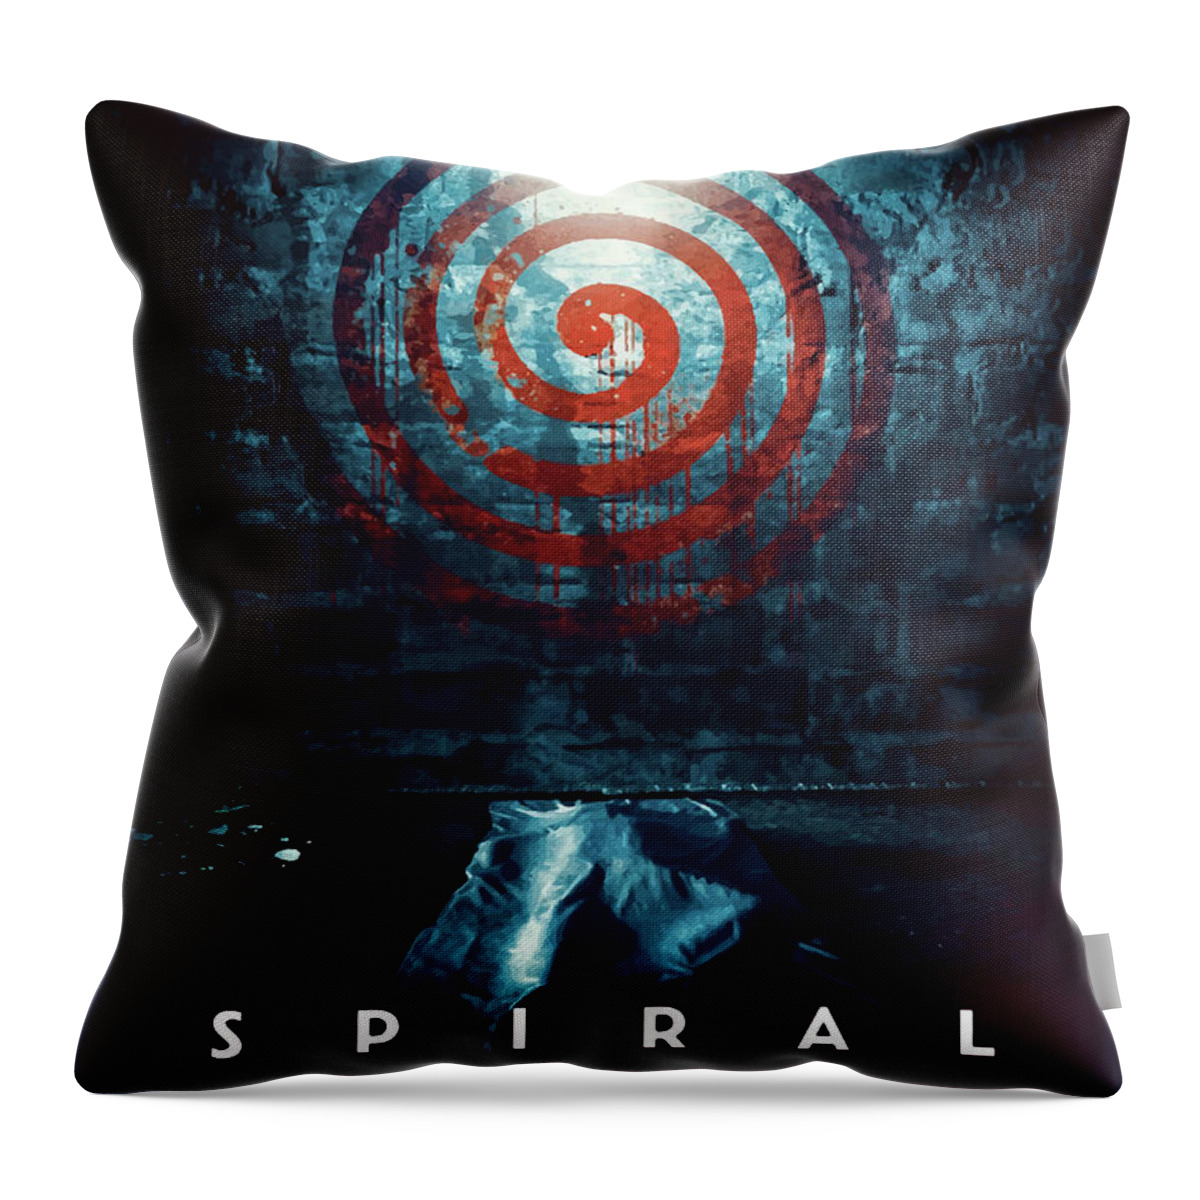 Movie Poster Throw Pillow featuring the digital art Spiral by Bo Kev